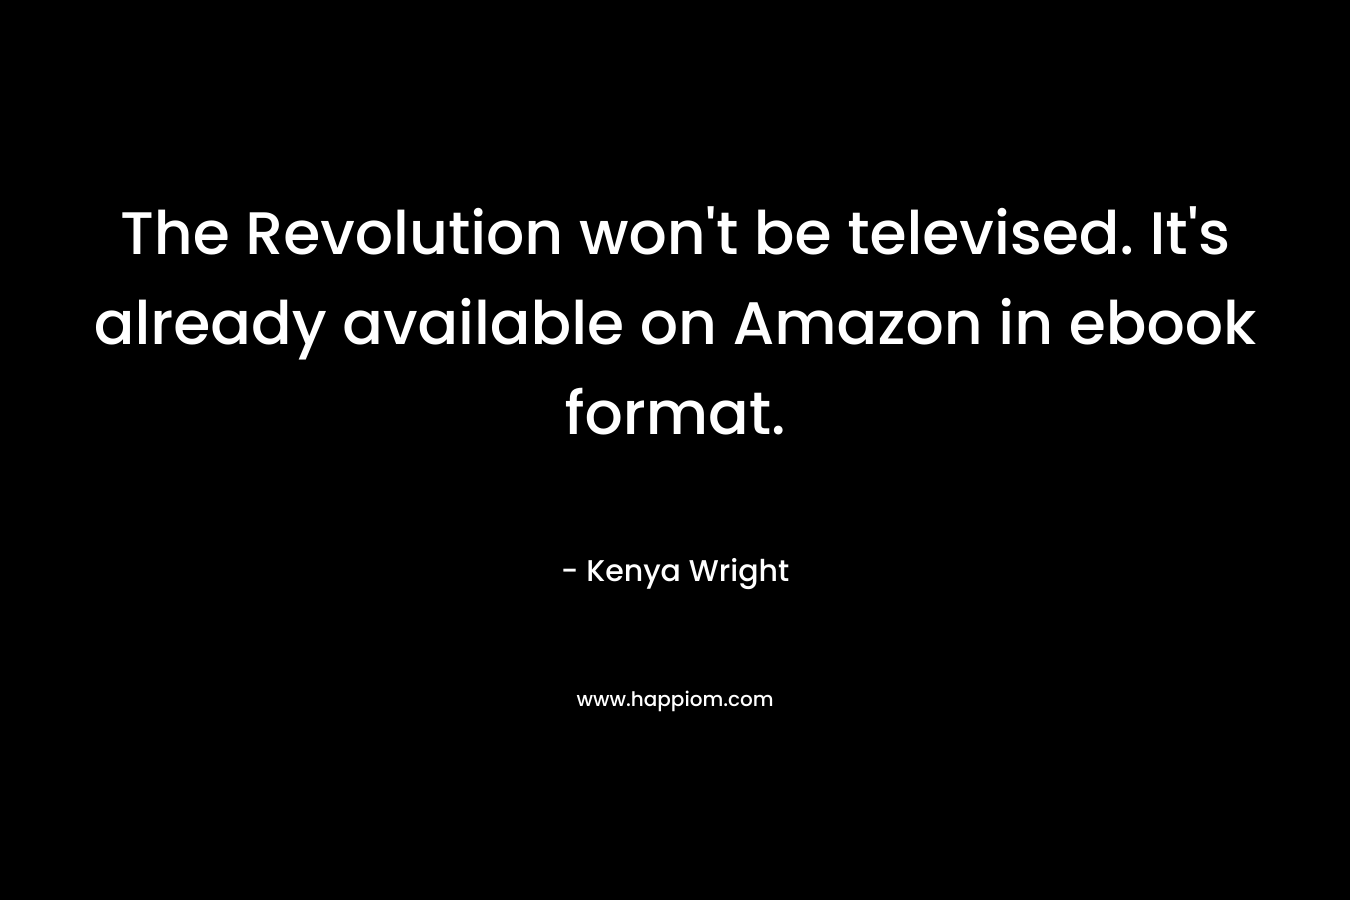 The Revolution won't be televised. It's already available on Amazon in ebook format.